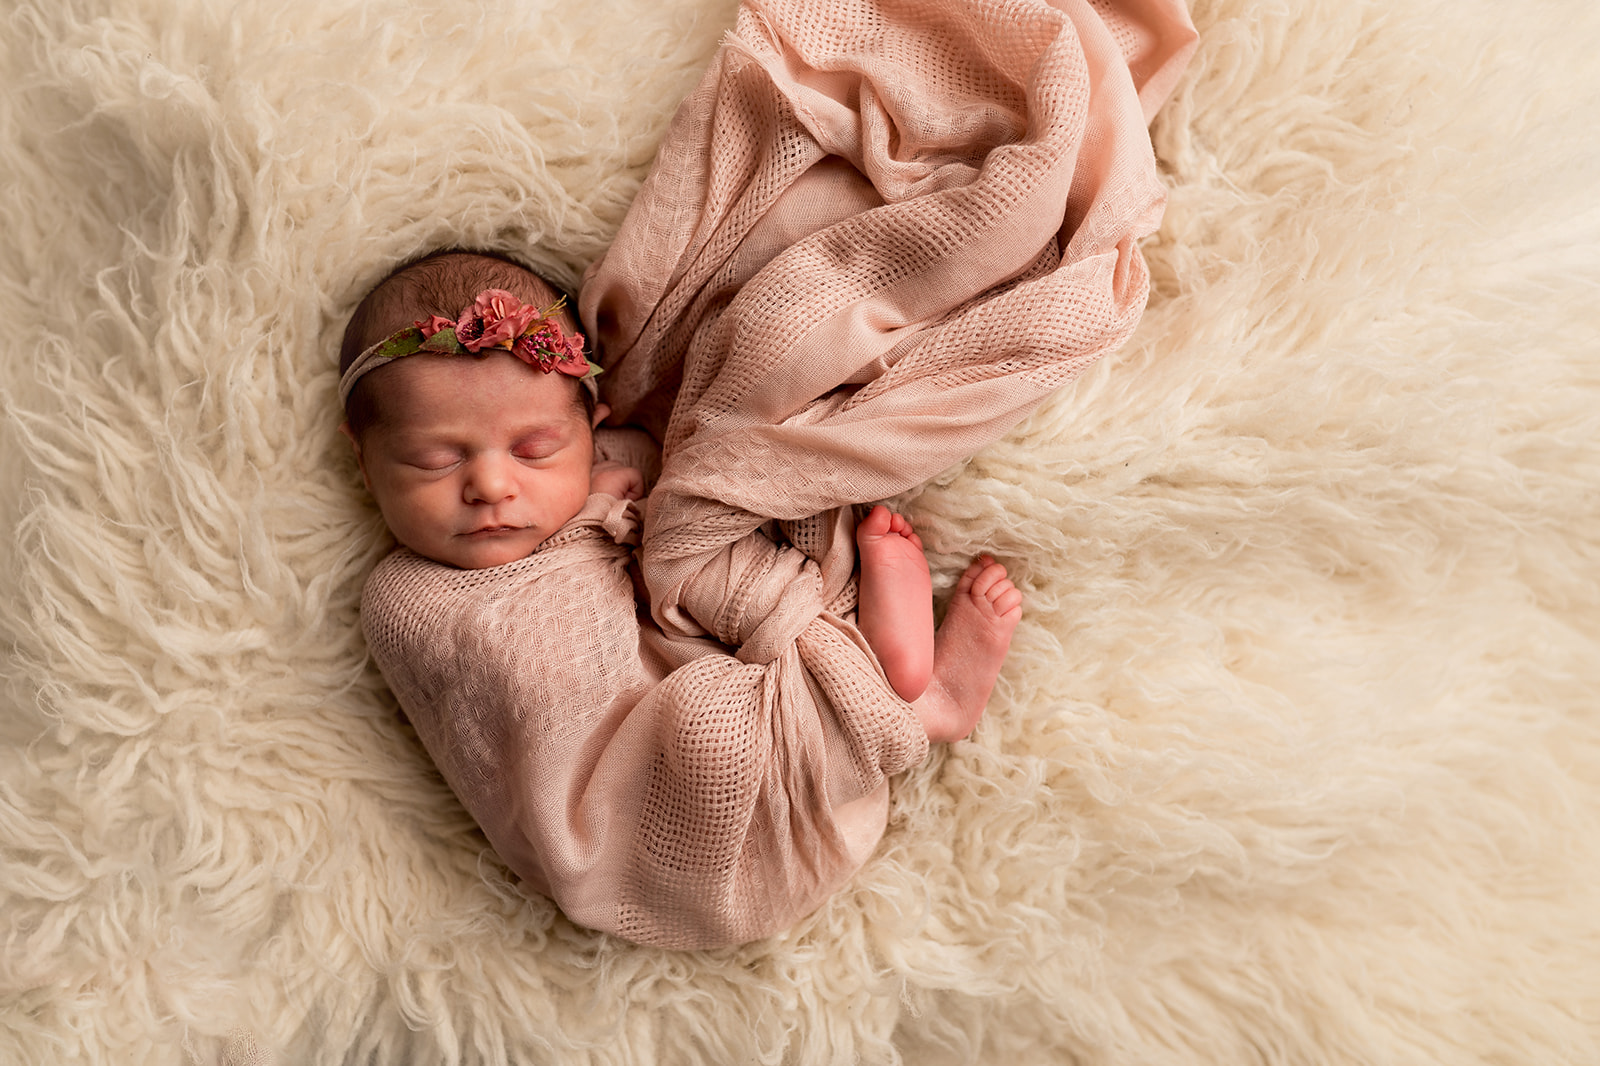 swaddled baby girl in pink on cream fur rug sleeping for newborn session